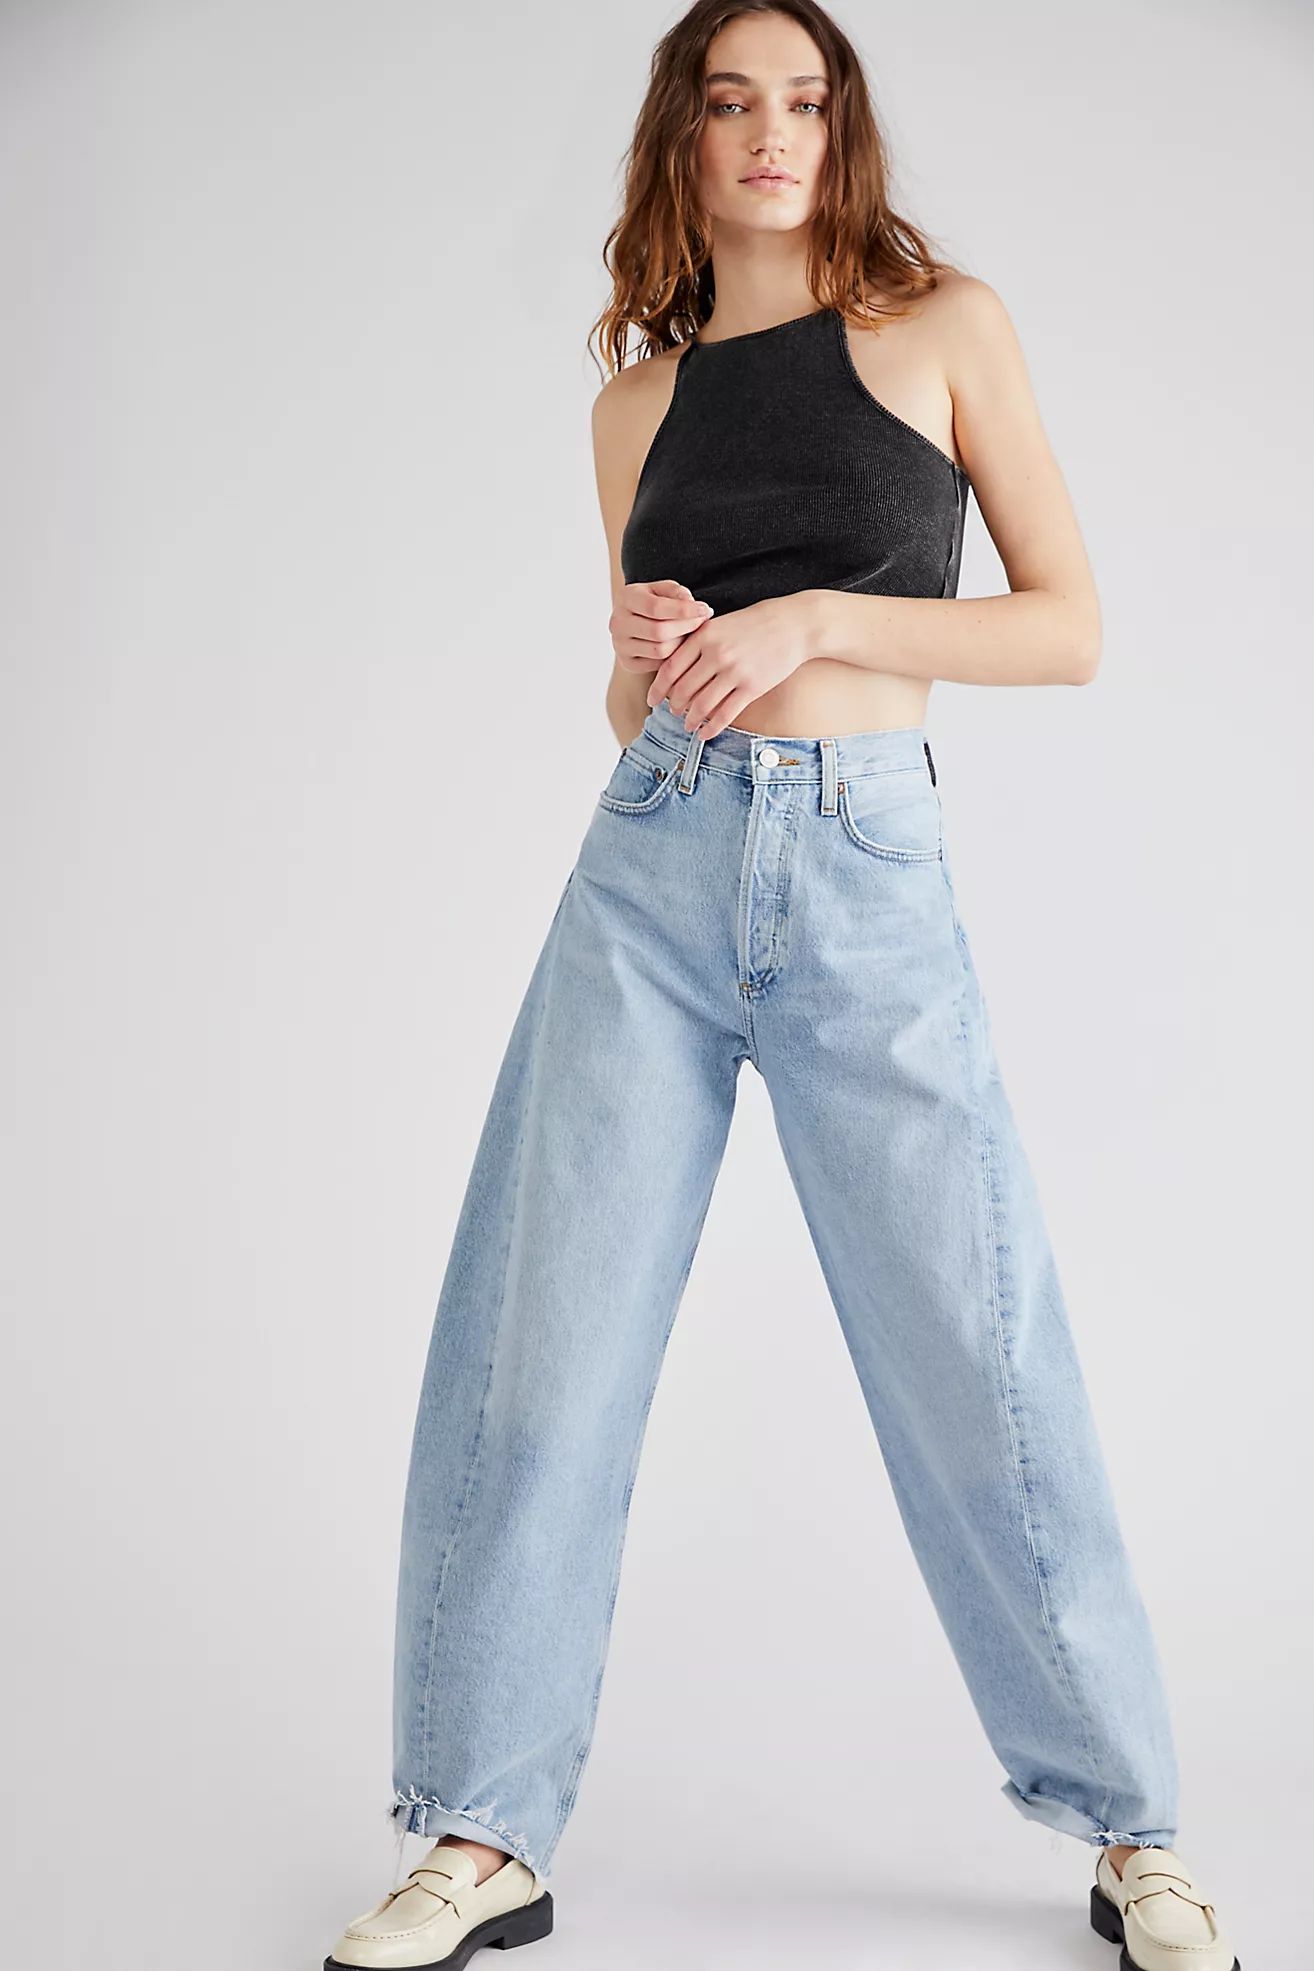 AGOLDE Luna Pieced Jeans | Free People (Global - UK&FR Excluded)